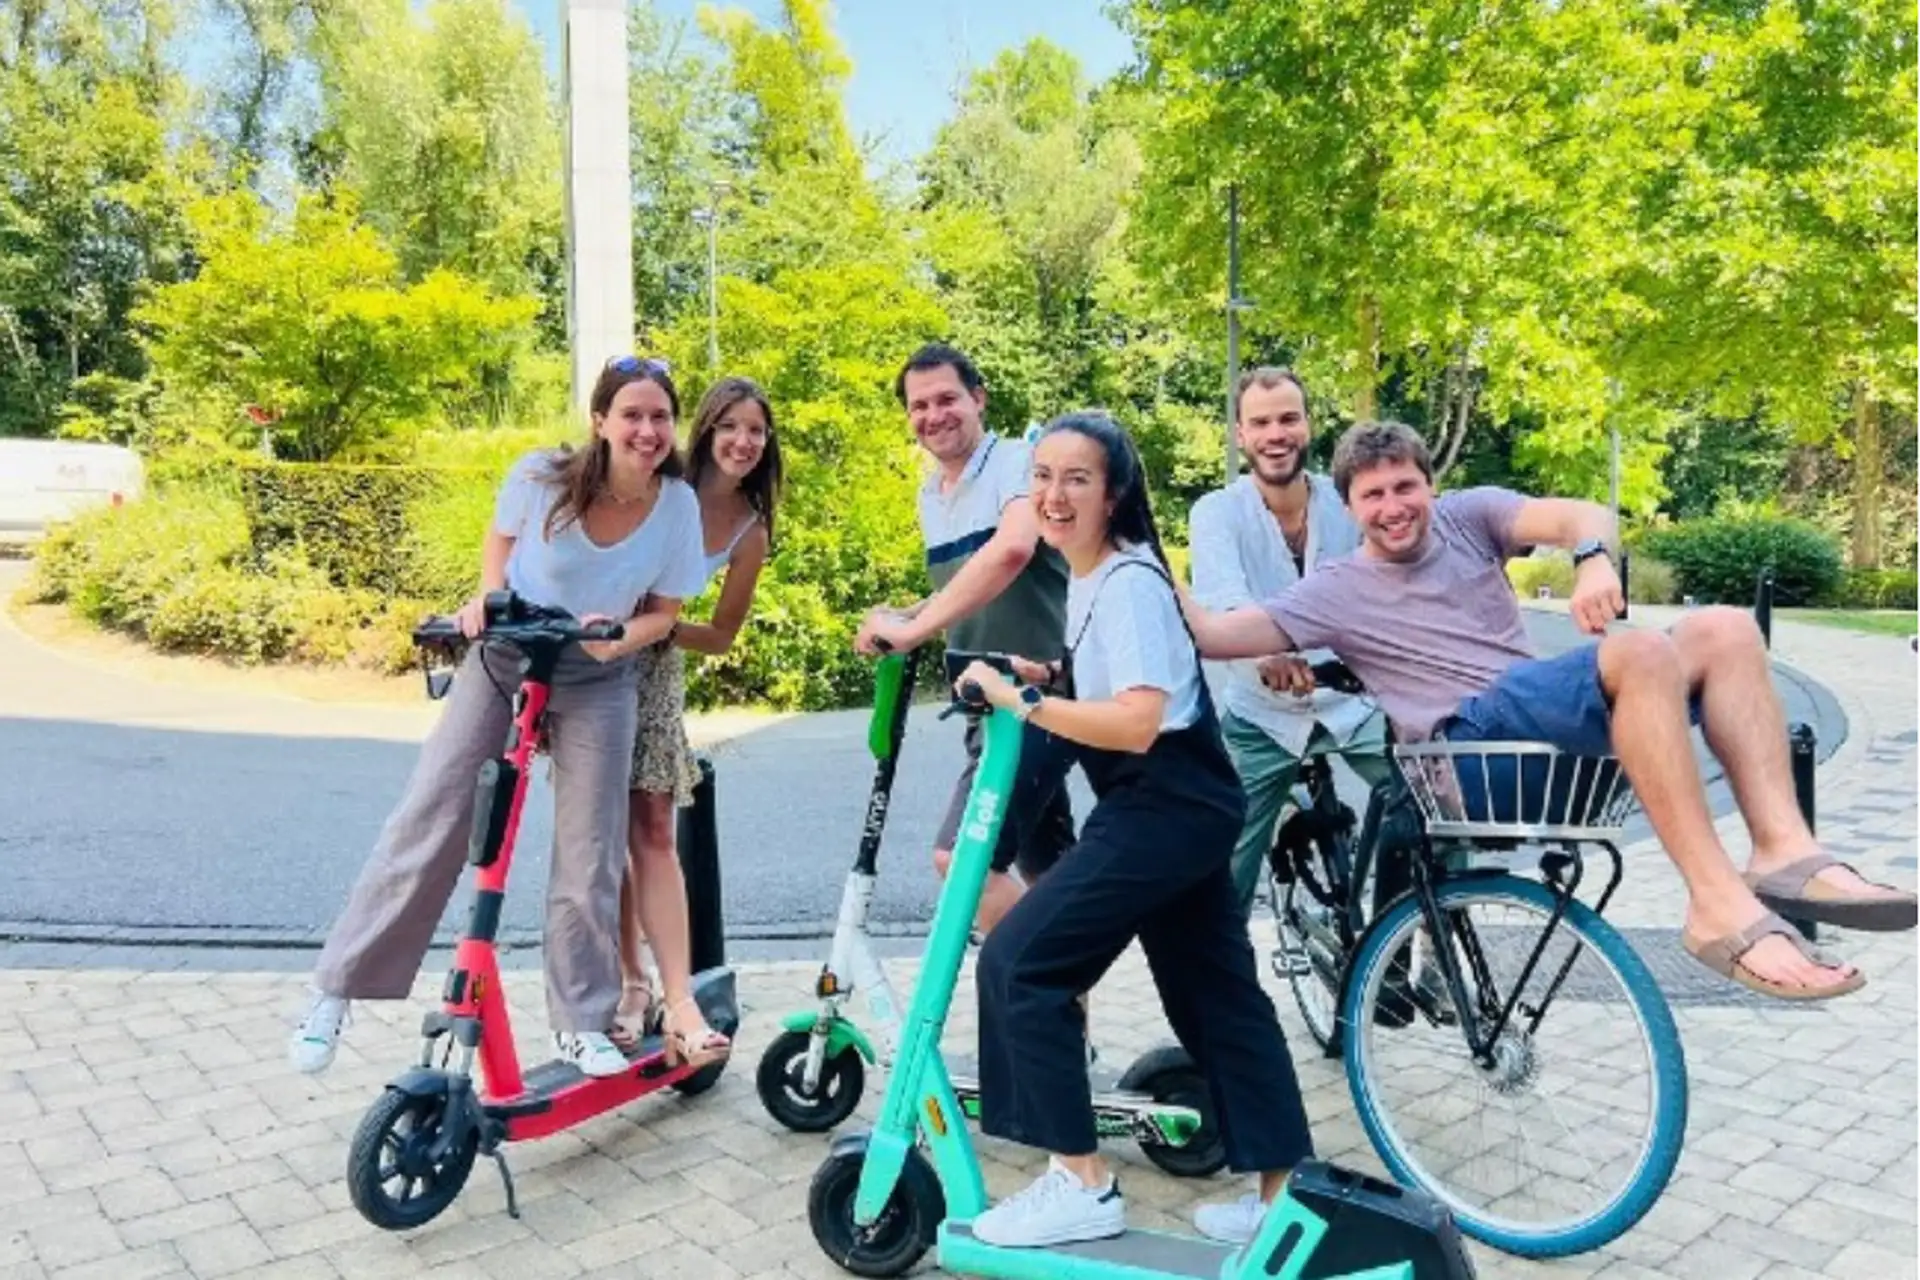 atlasGO x Tapio: engaging employees in a playful sustainable mobility challenge